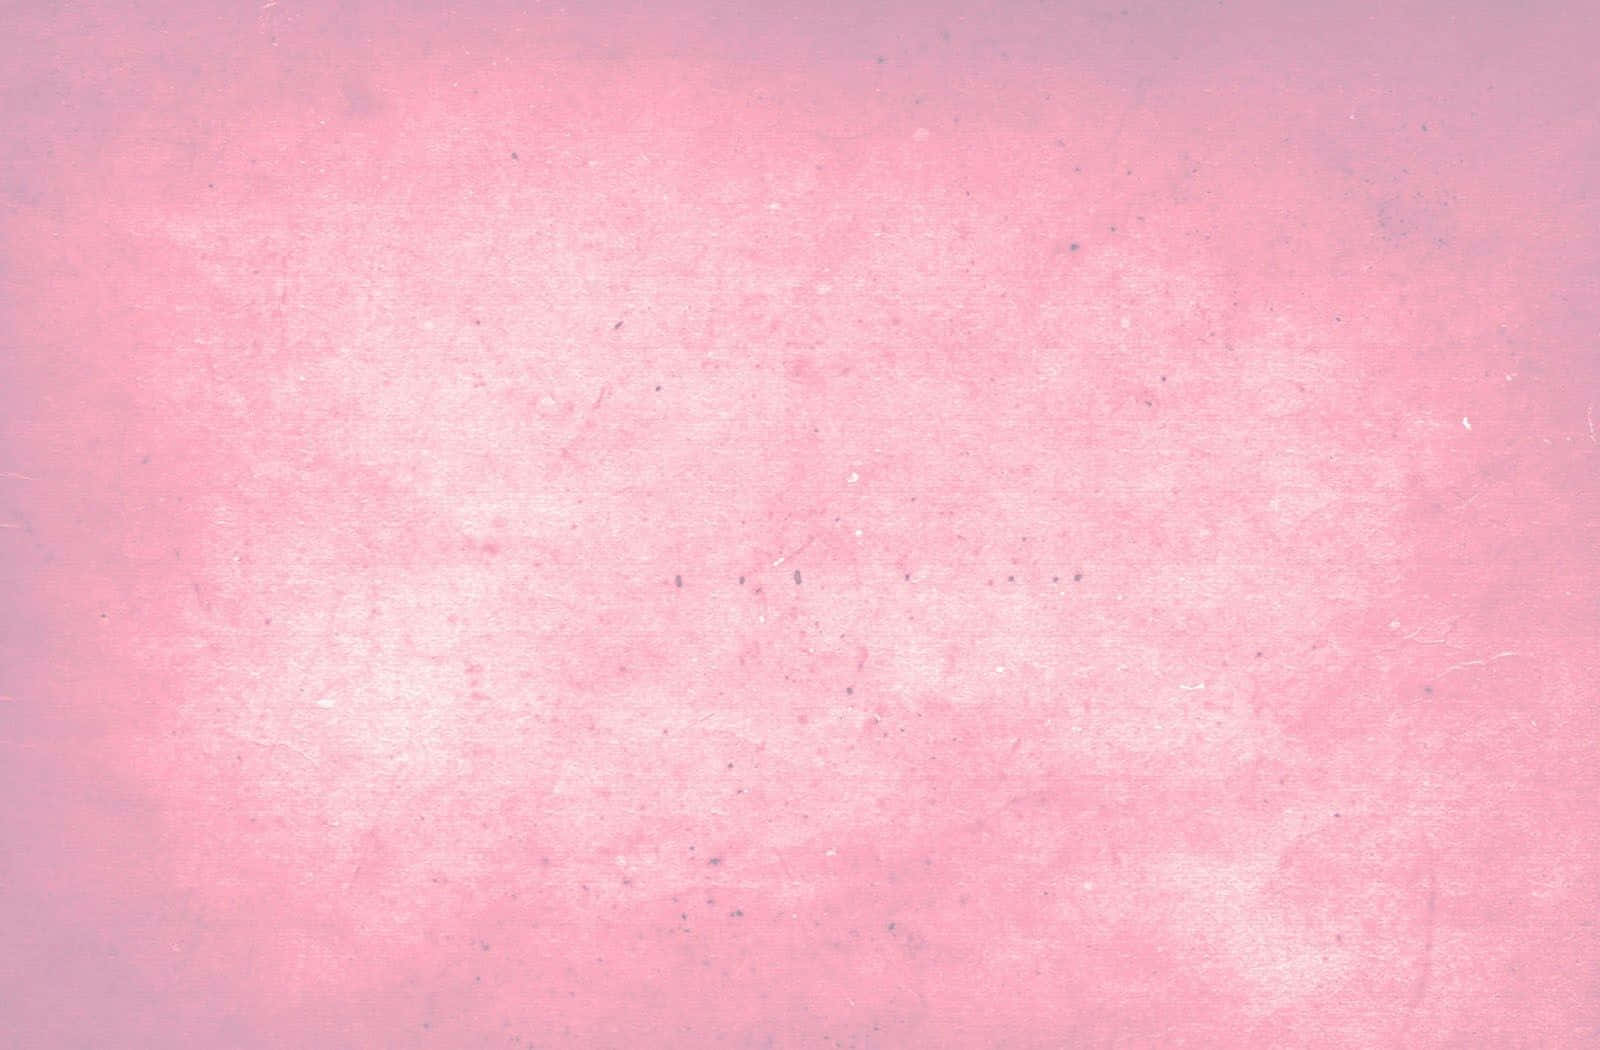 Abstract pink background featuring handpainted design